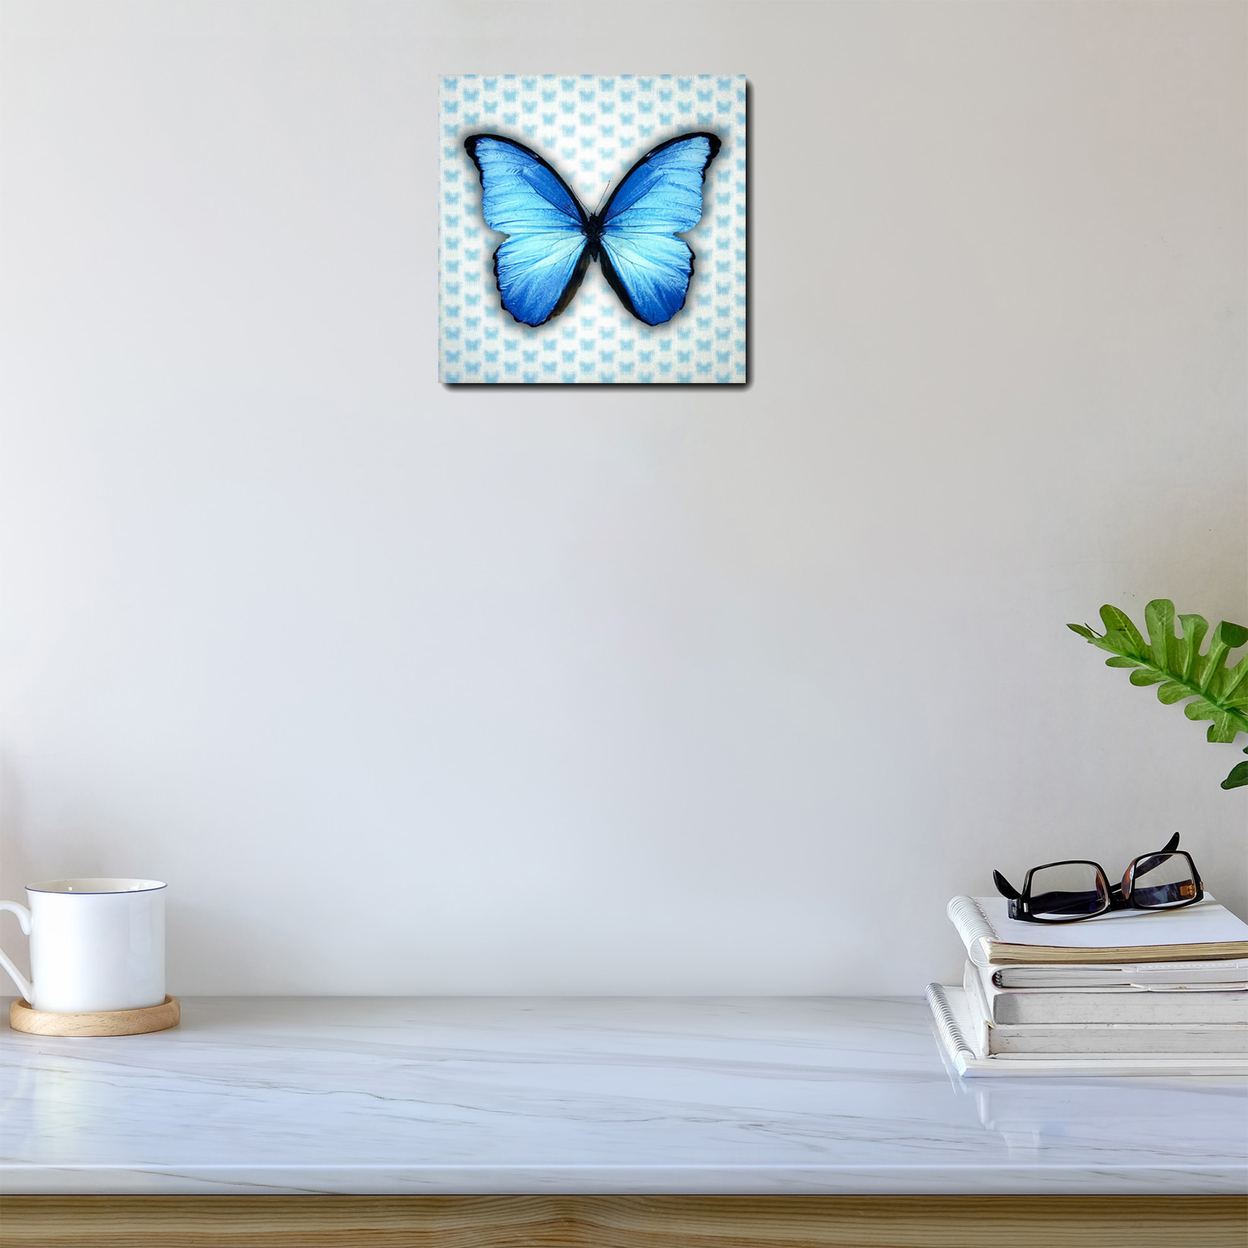 Multi-Dimensional 5D Blue Butterfly Wall Art Print On Strong Polycarbonate Panel W Vibrant Colors - Lenticular Artwork By Matashi (12x12 In)